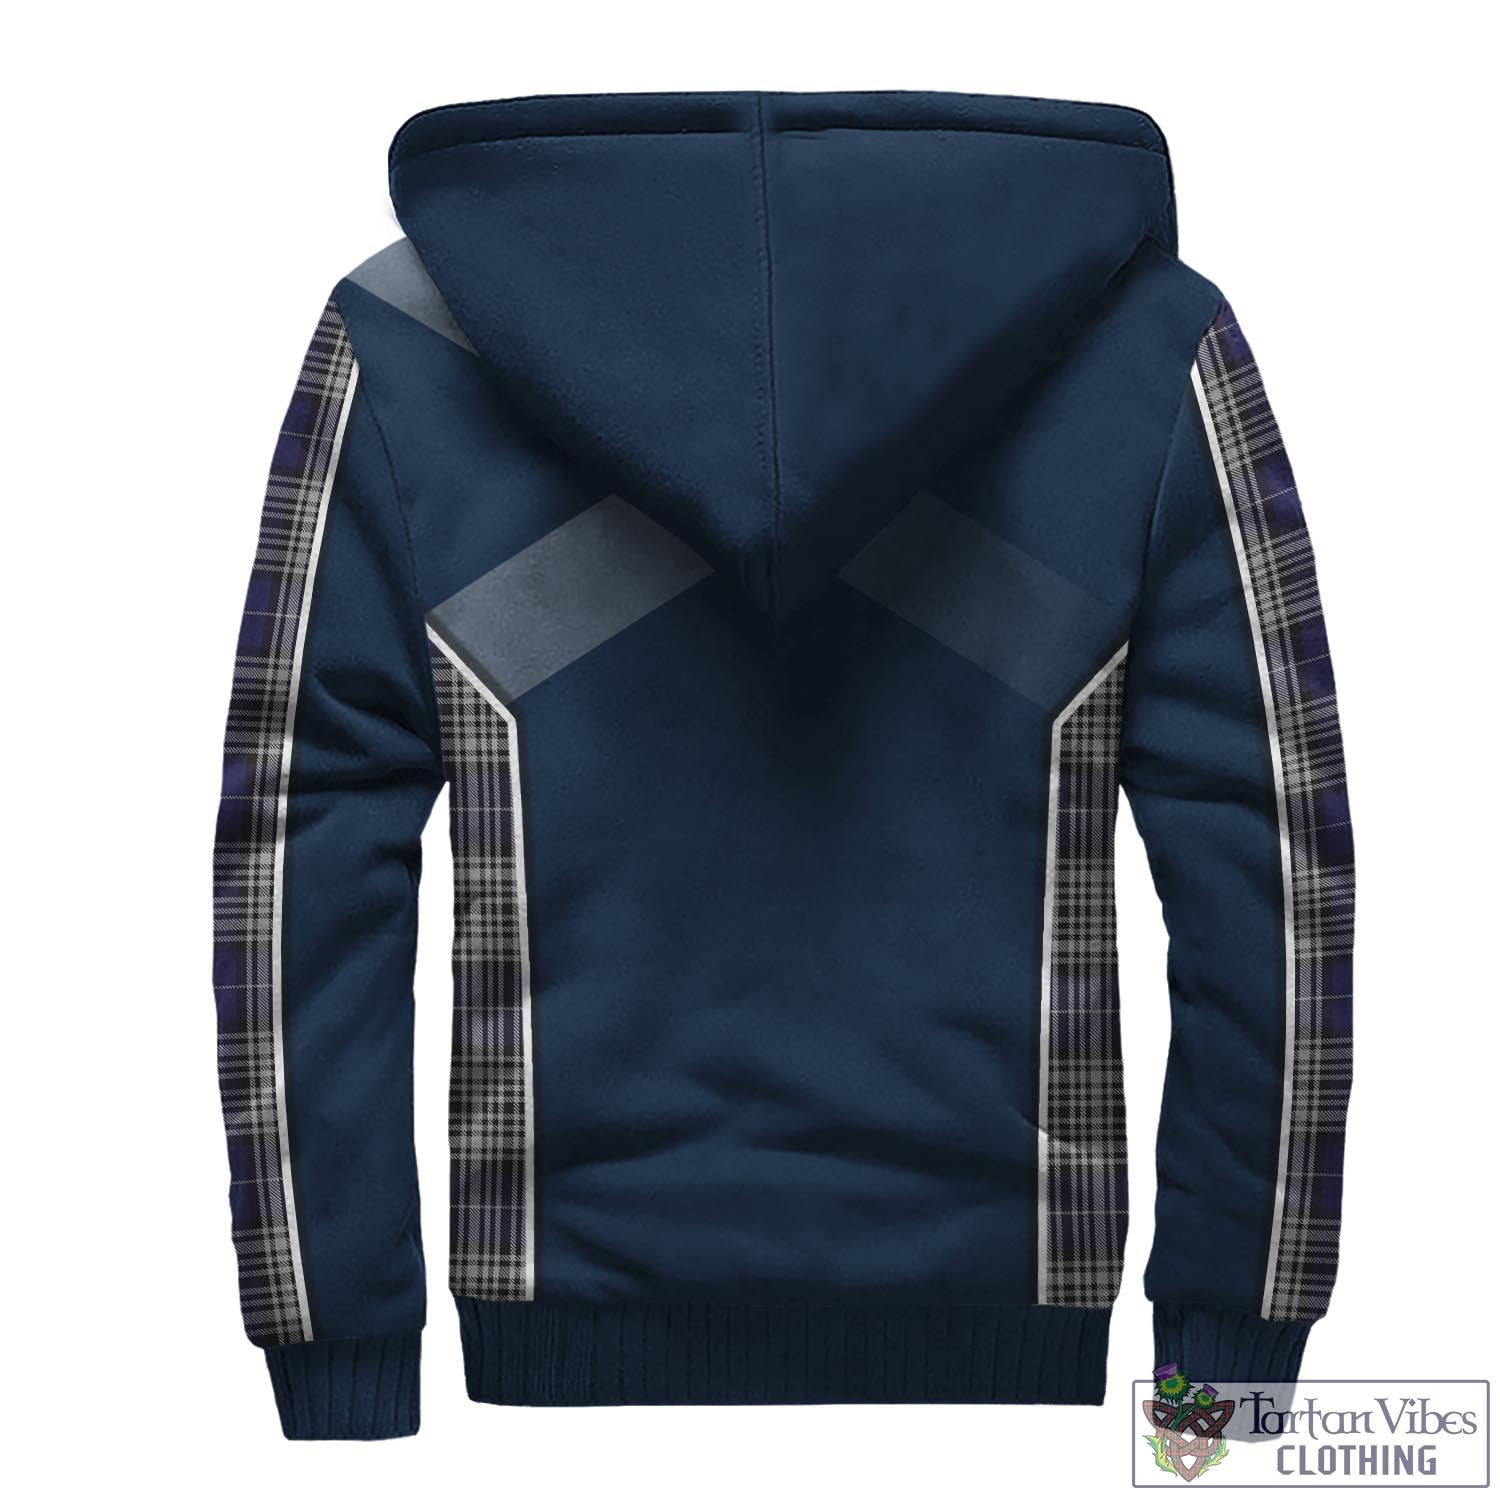 Tartan Vibes Clothing Napier Tartan Sherpa Hoodie with Family Crest and Scottish Thistle Vibes Sport Style